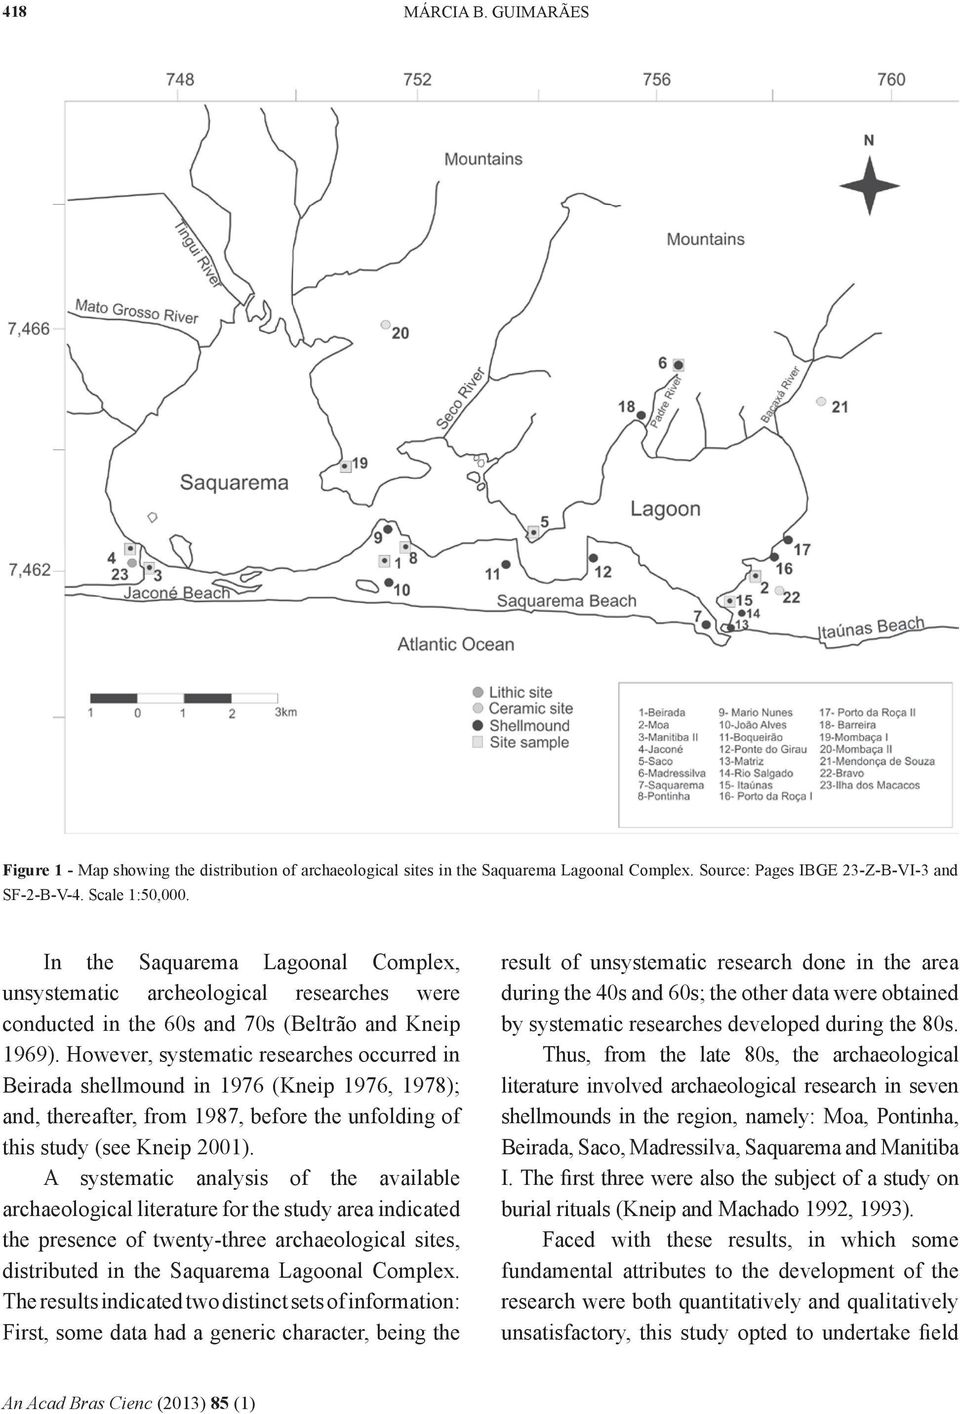 However, systematic researches occurred in Beirada shellmound in 1976 (Kneip 1976, 1978); and, thereafter, from 1987, before the unfolding of this study (see Kneip 2001).